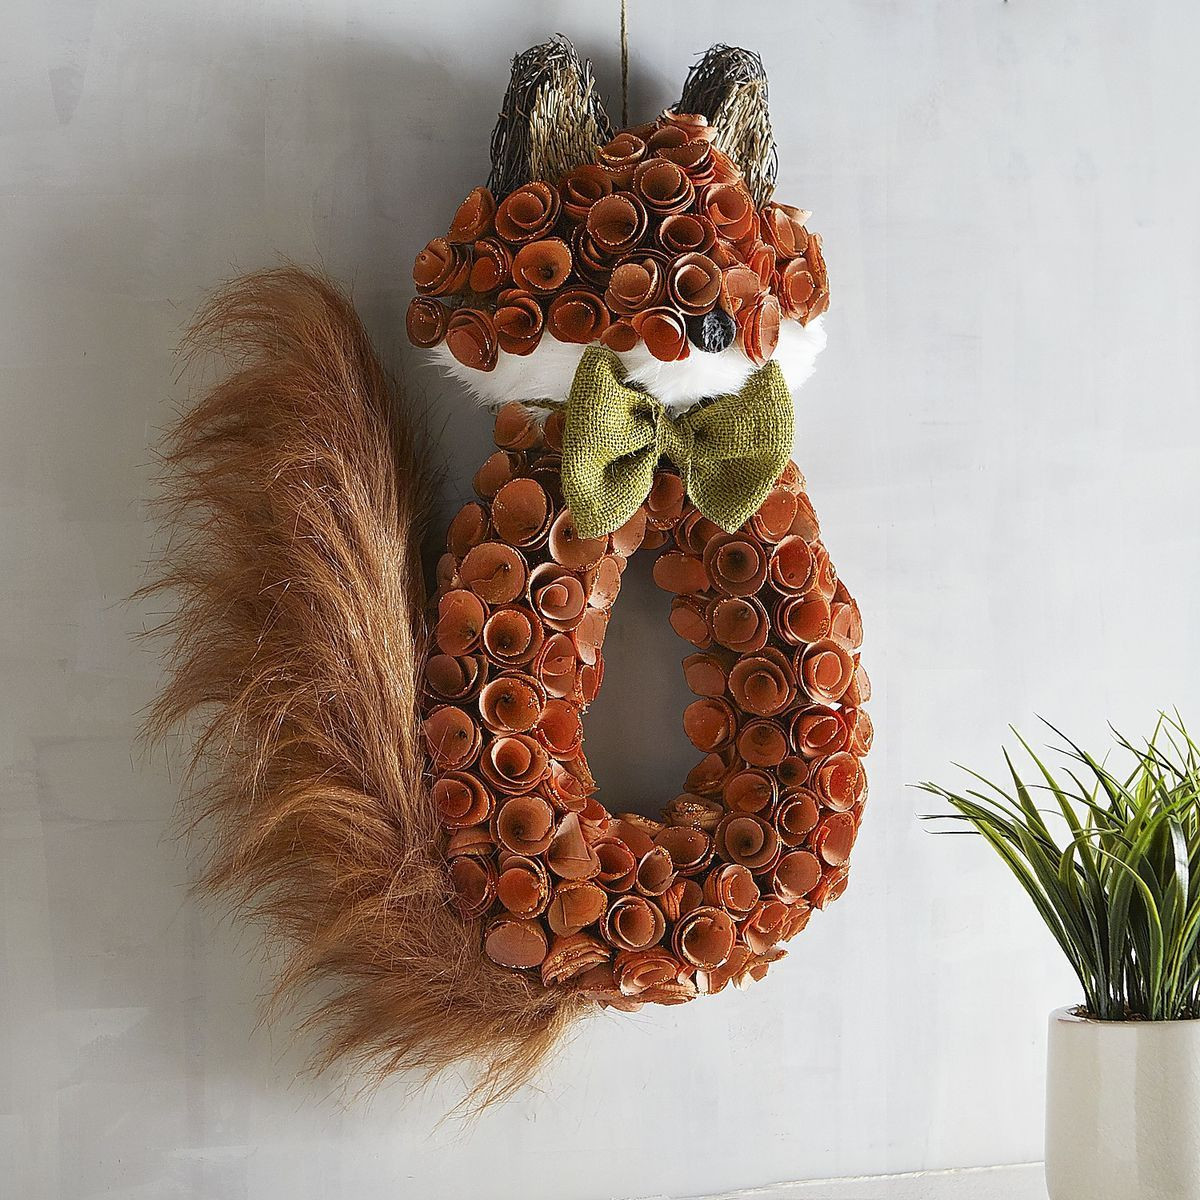 20 Awesome Pier 1 Owl Vase 2024 free download pier 1 owl vase of glitter wood curl fox wall decor pier 1 imports fall decorating for glitter wood curl fox wall decor pier 1 imports